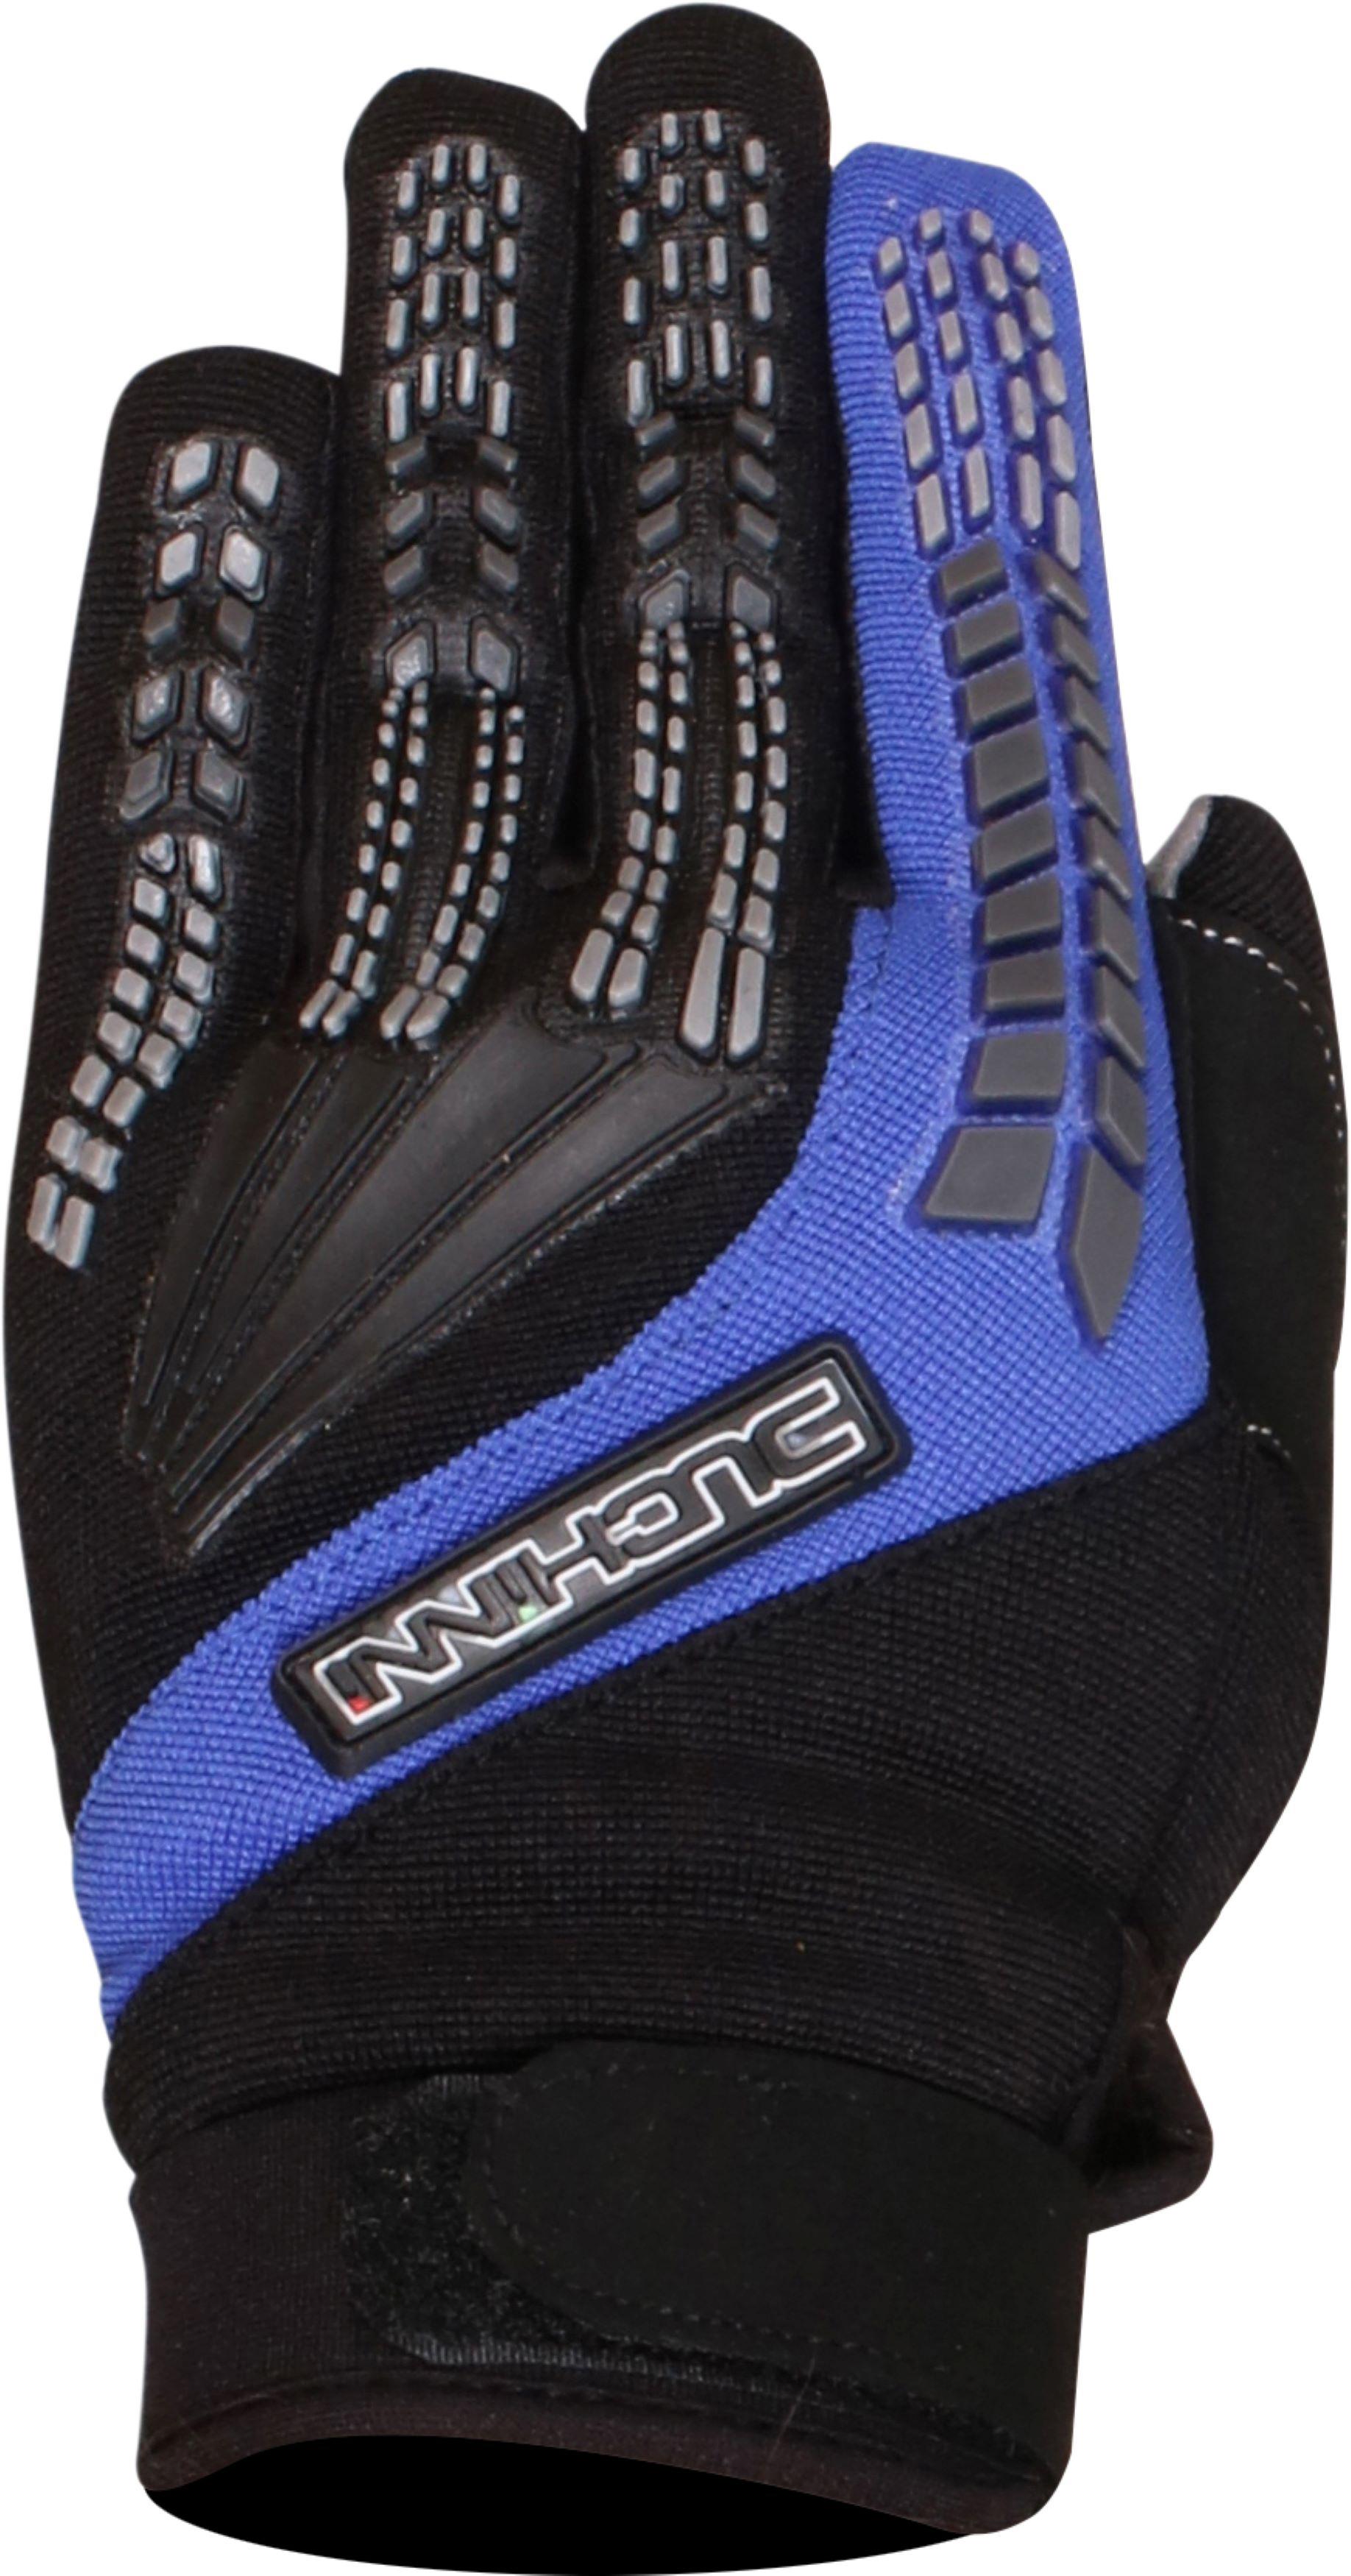 Duchinni Focus Motorcycle Gloves - Black And Blue, Xl